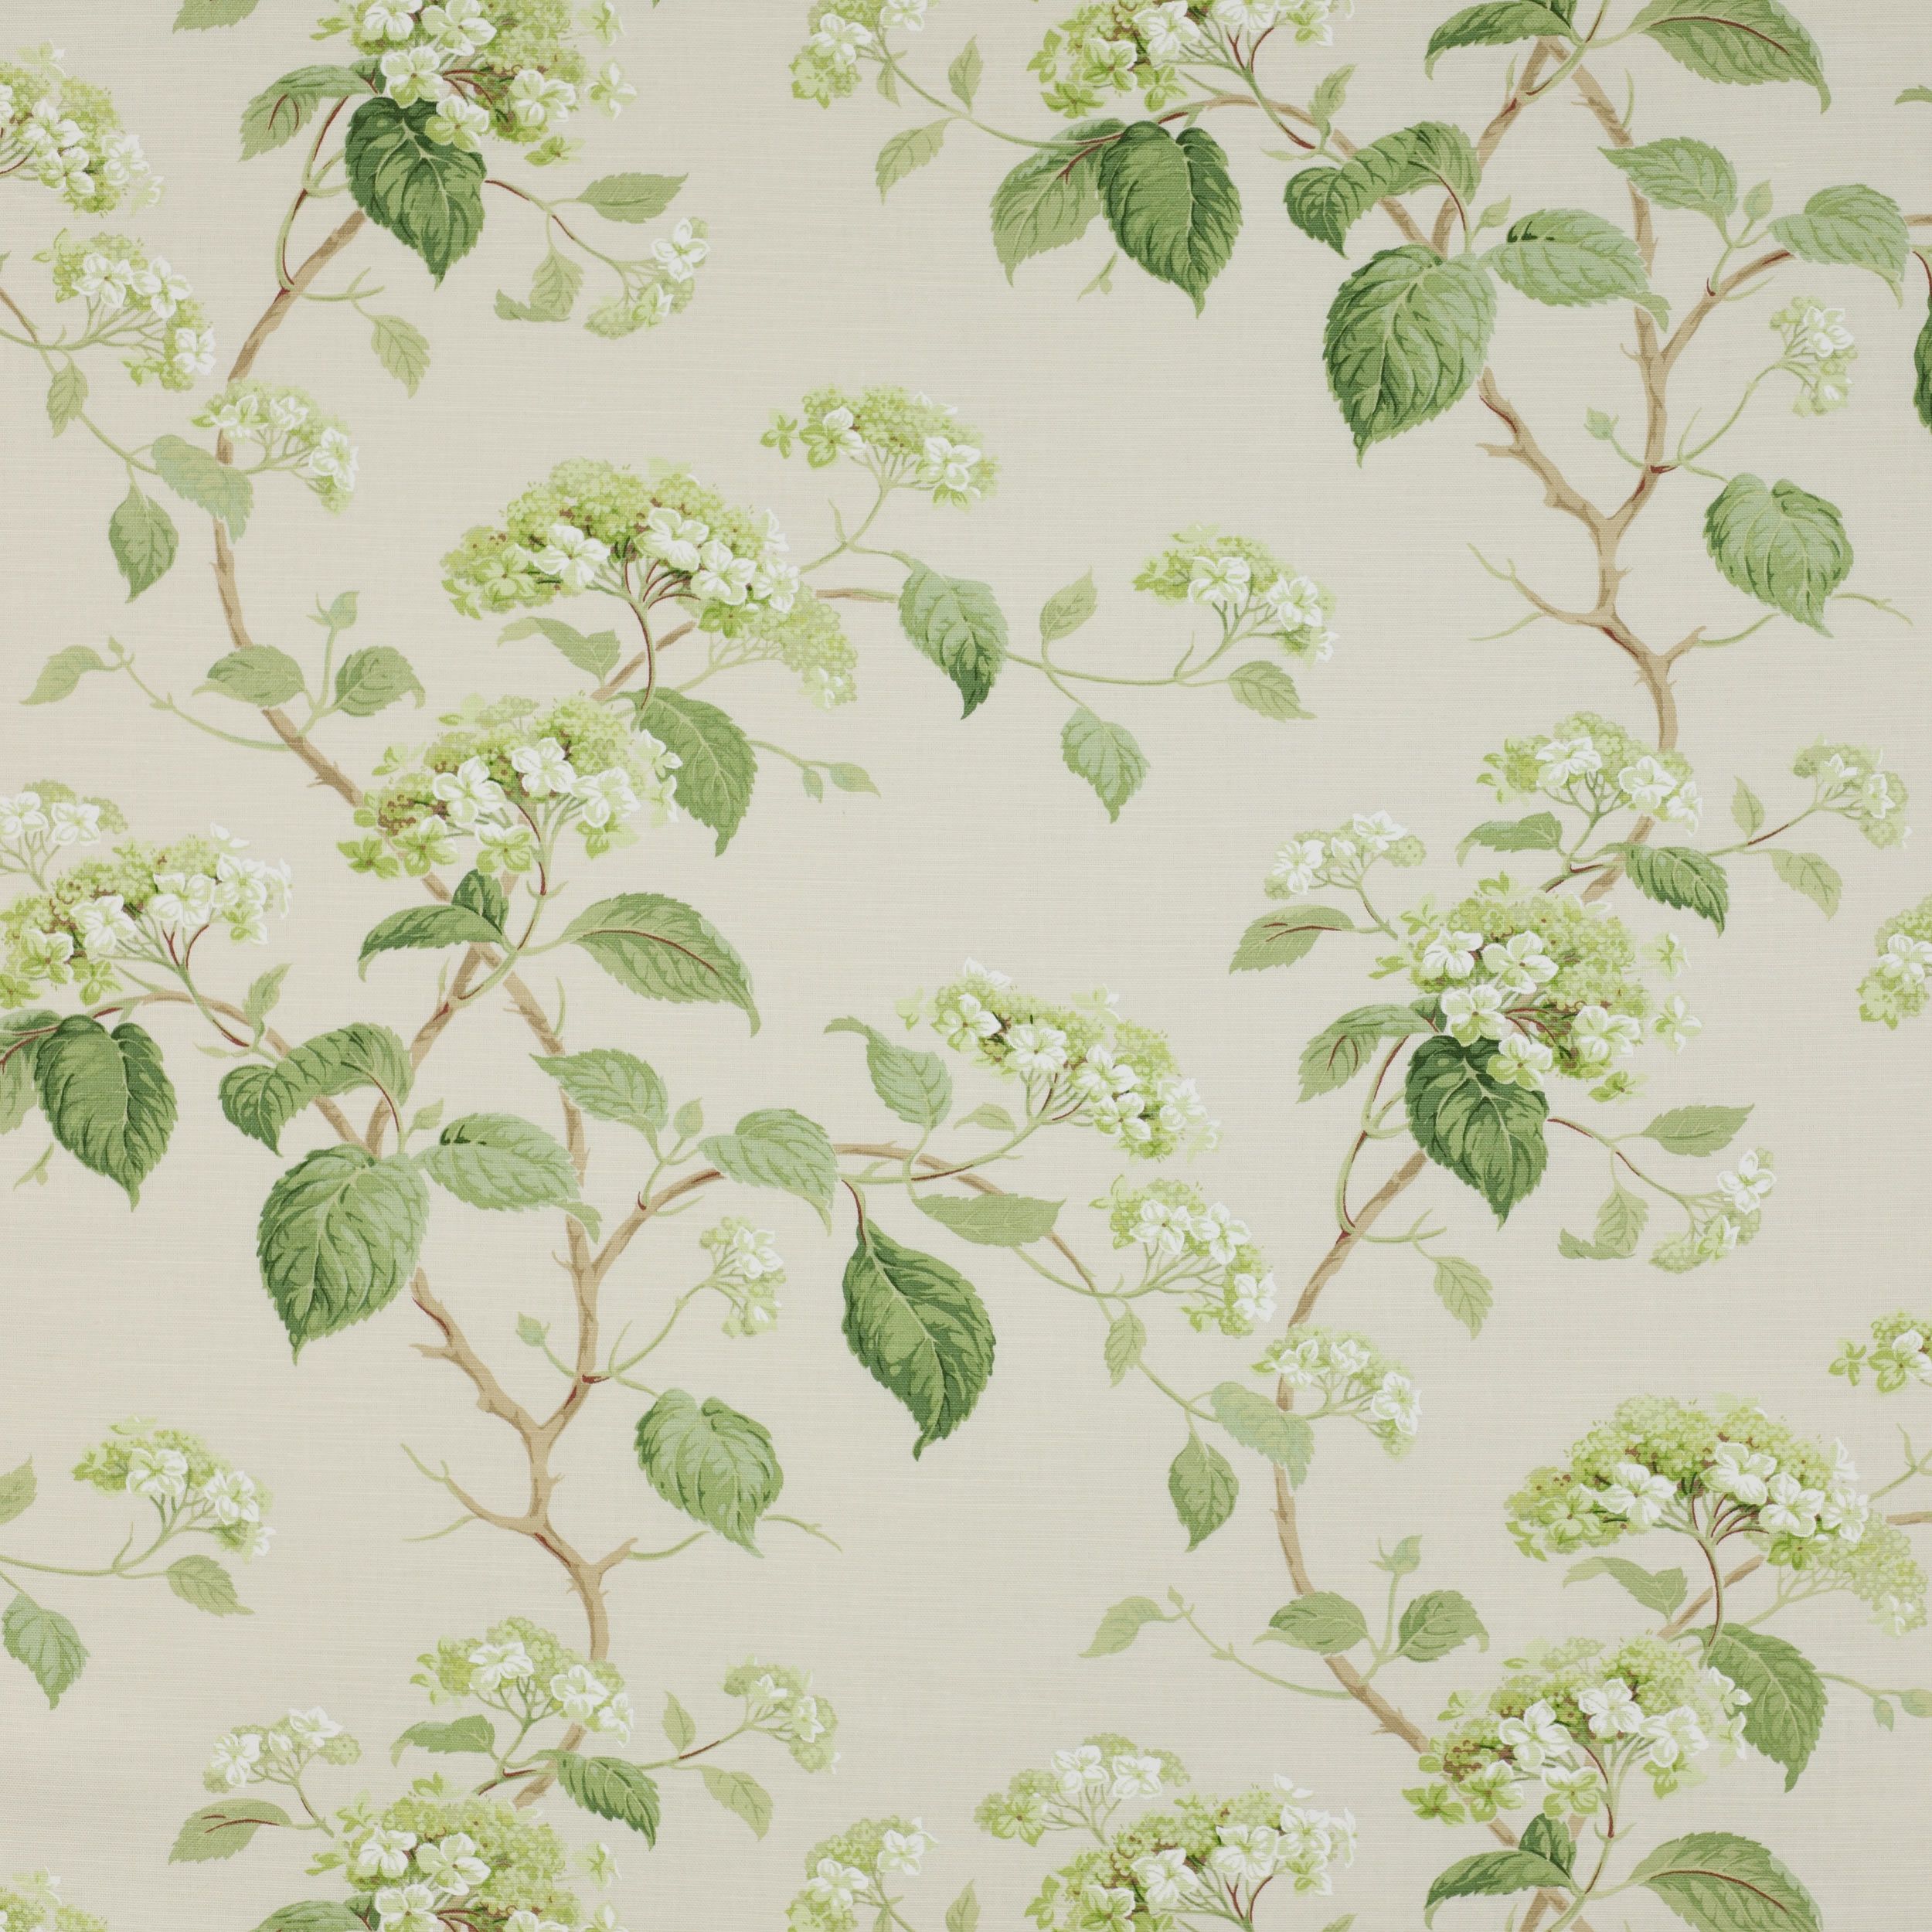 Colefax And Fowler S Summerby Colefaxandfowler Floral Textile